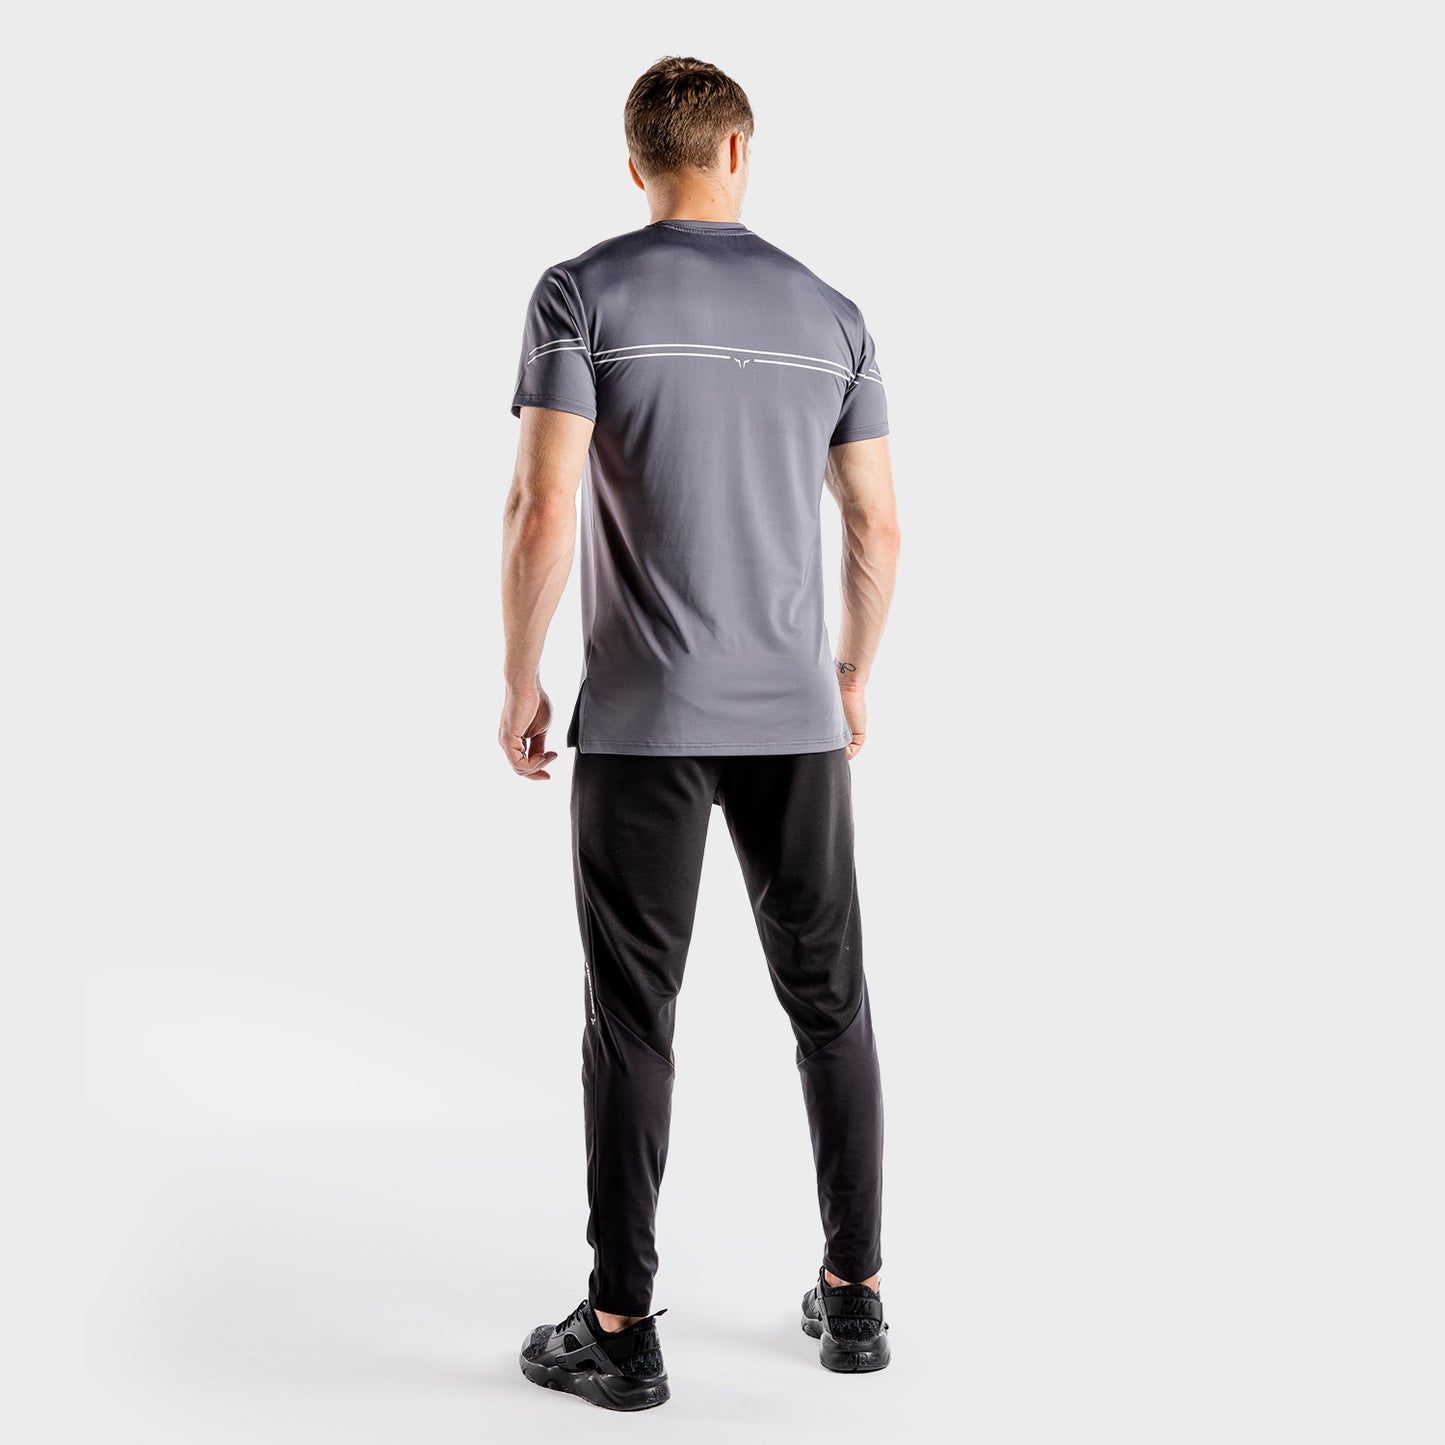 squatwolf-gym-wear-flux-tee-grey-workout-shirts-for-men